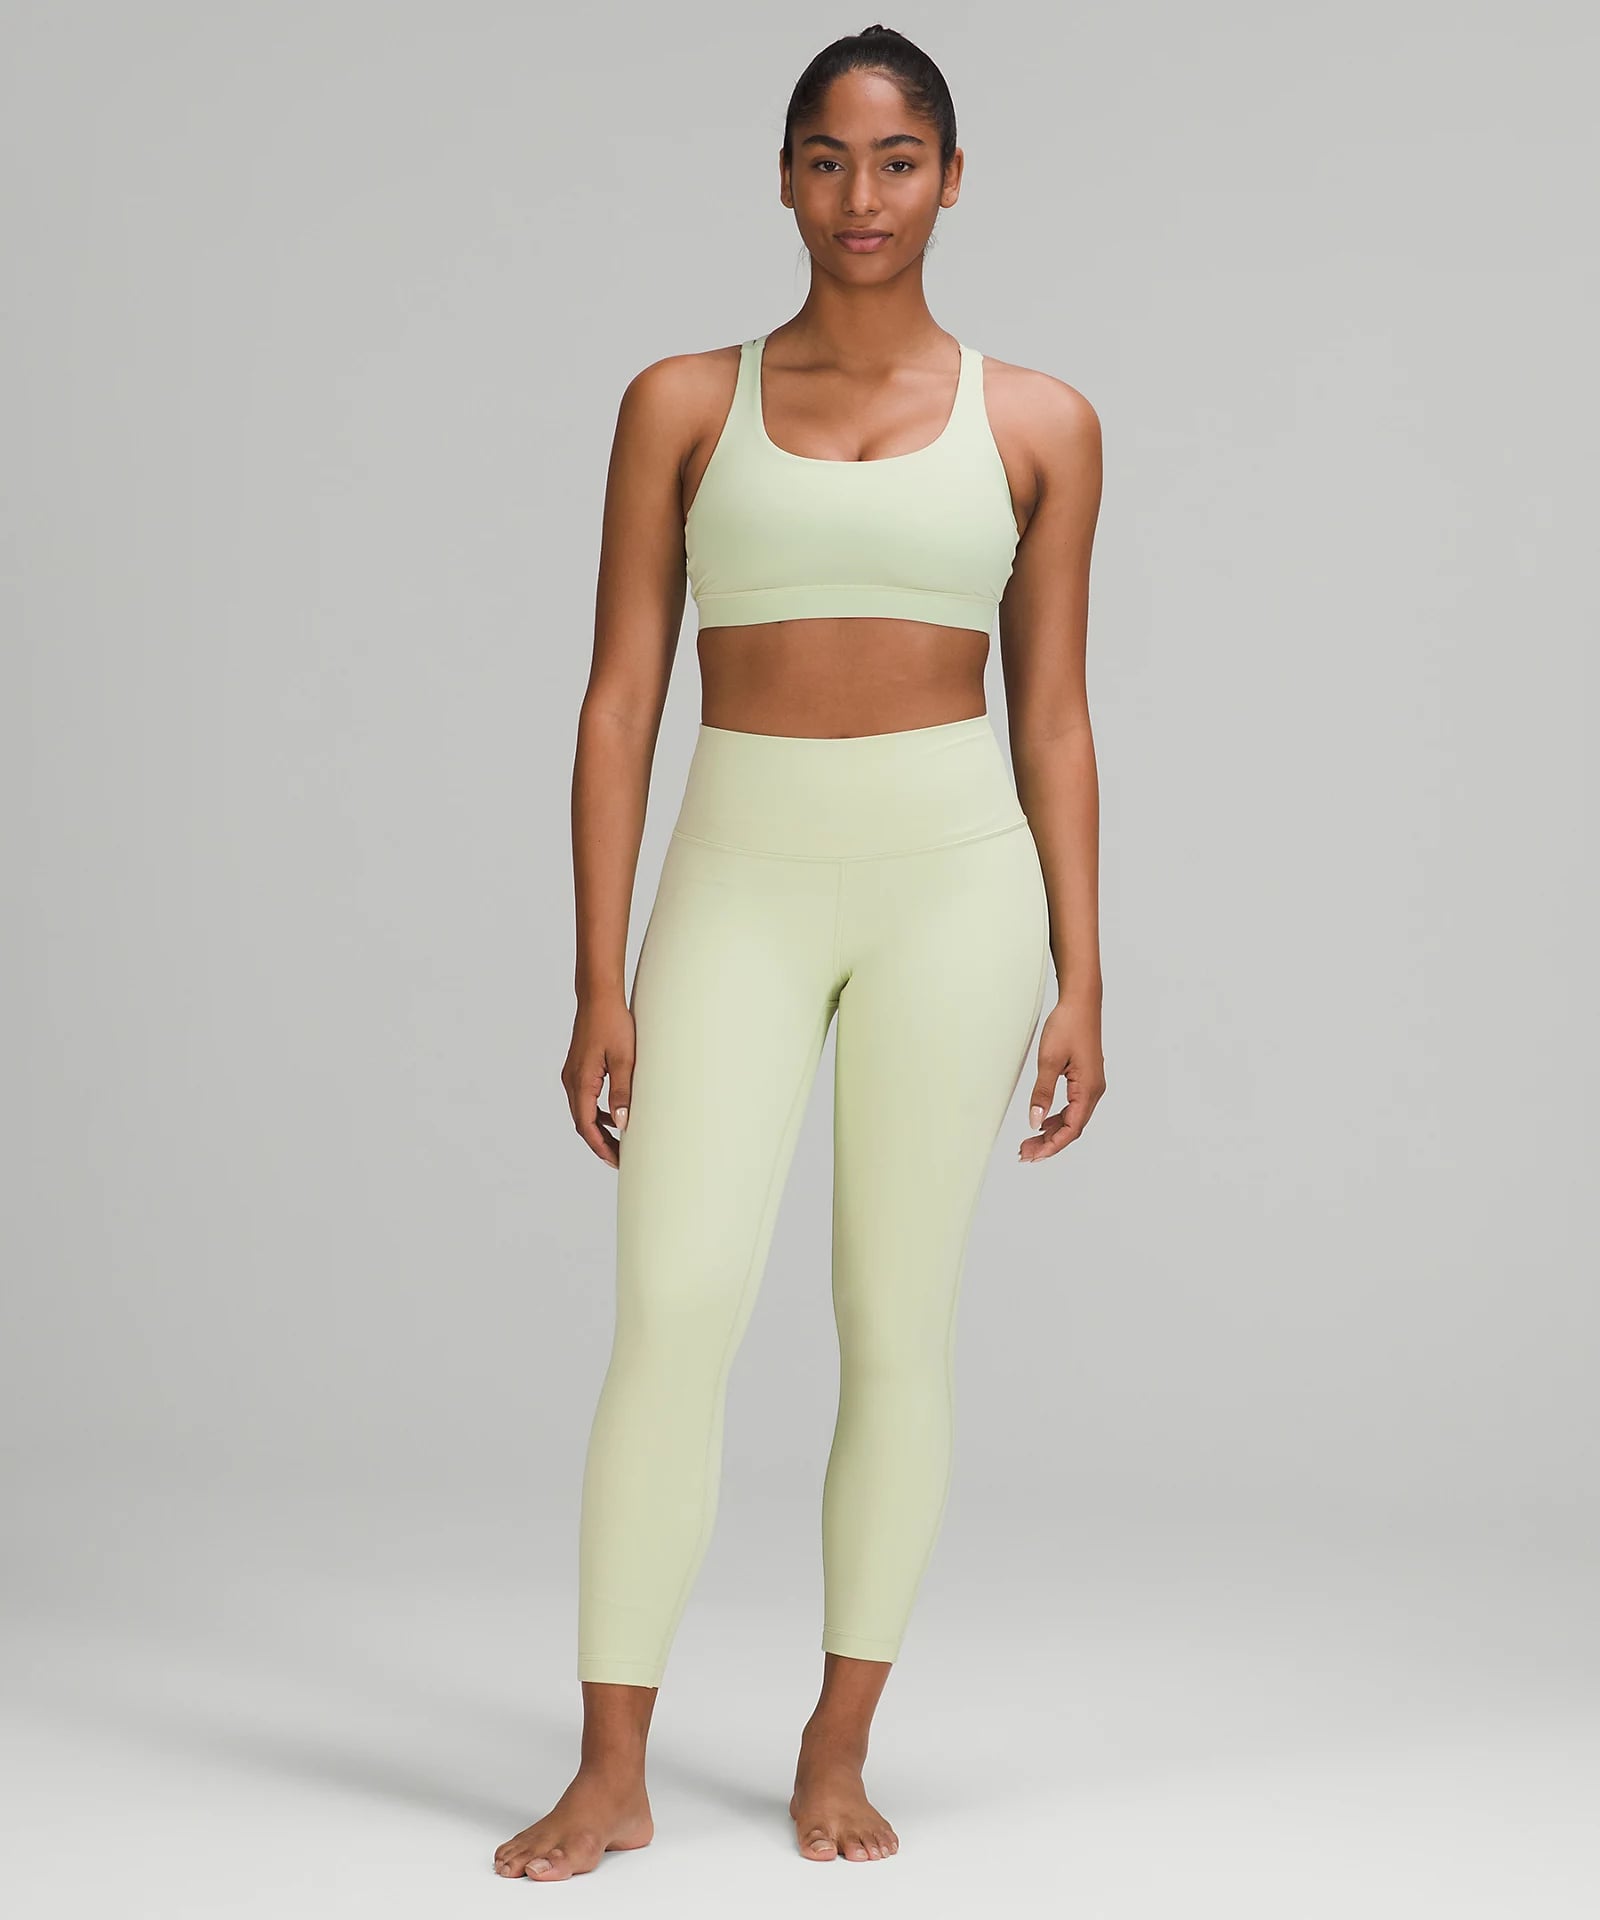 lululemon We Made Too Much sale: Enjoy a new haul of high-quality